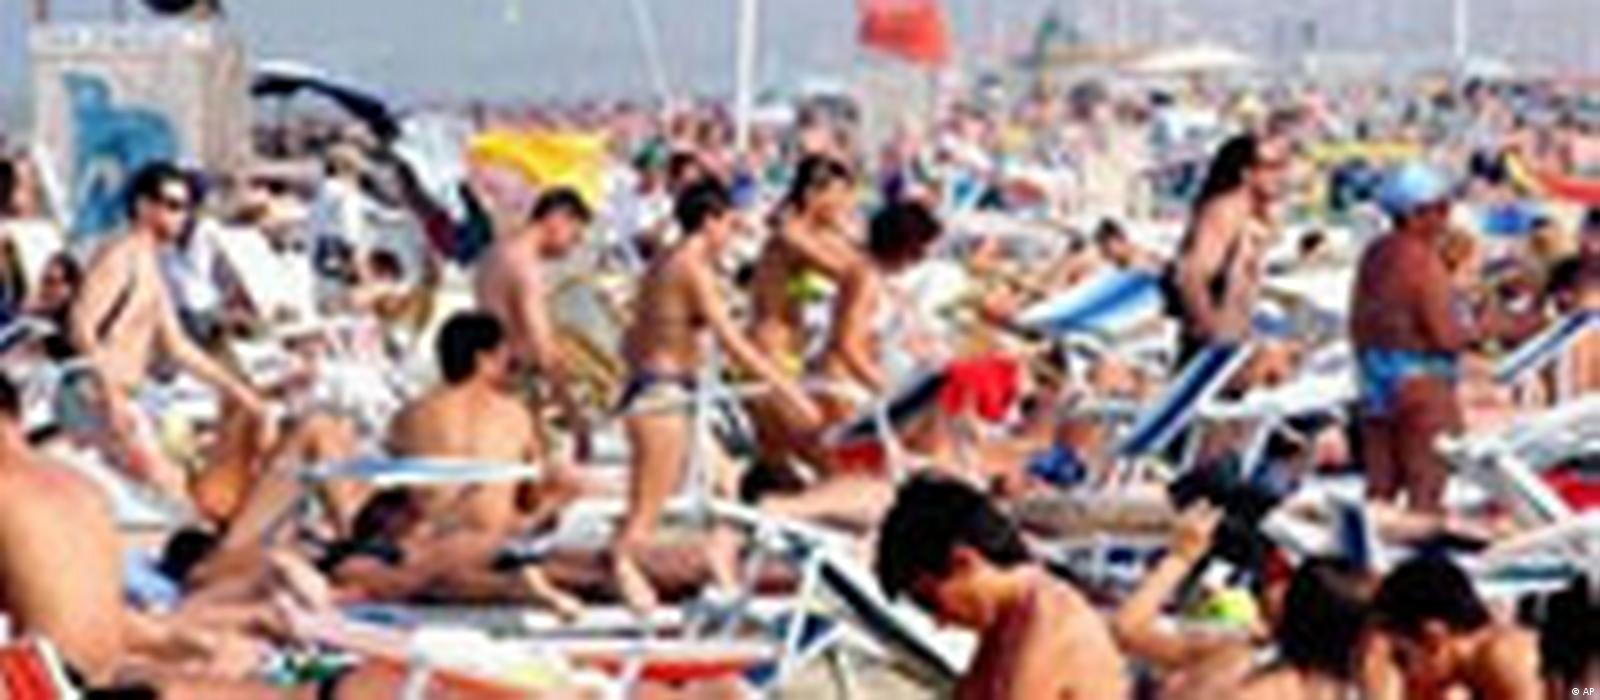 Drunk Party Naked Beach Videos - Germans Angry About Italian Beach Ban â€“ DW â€“ 07/31/2005